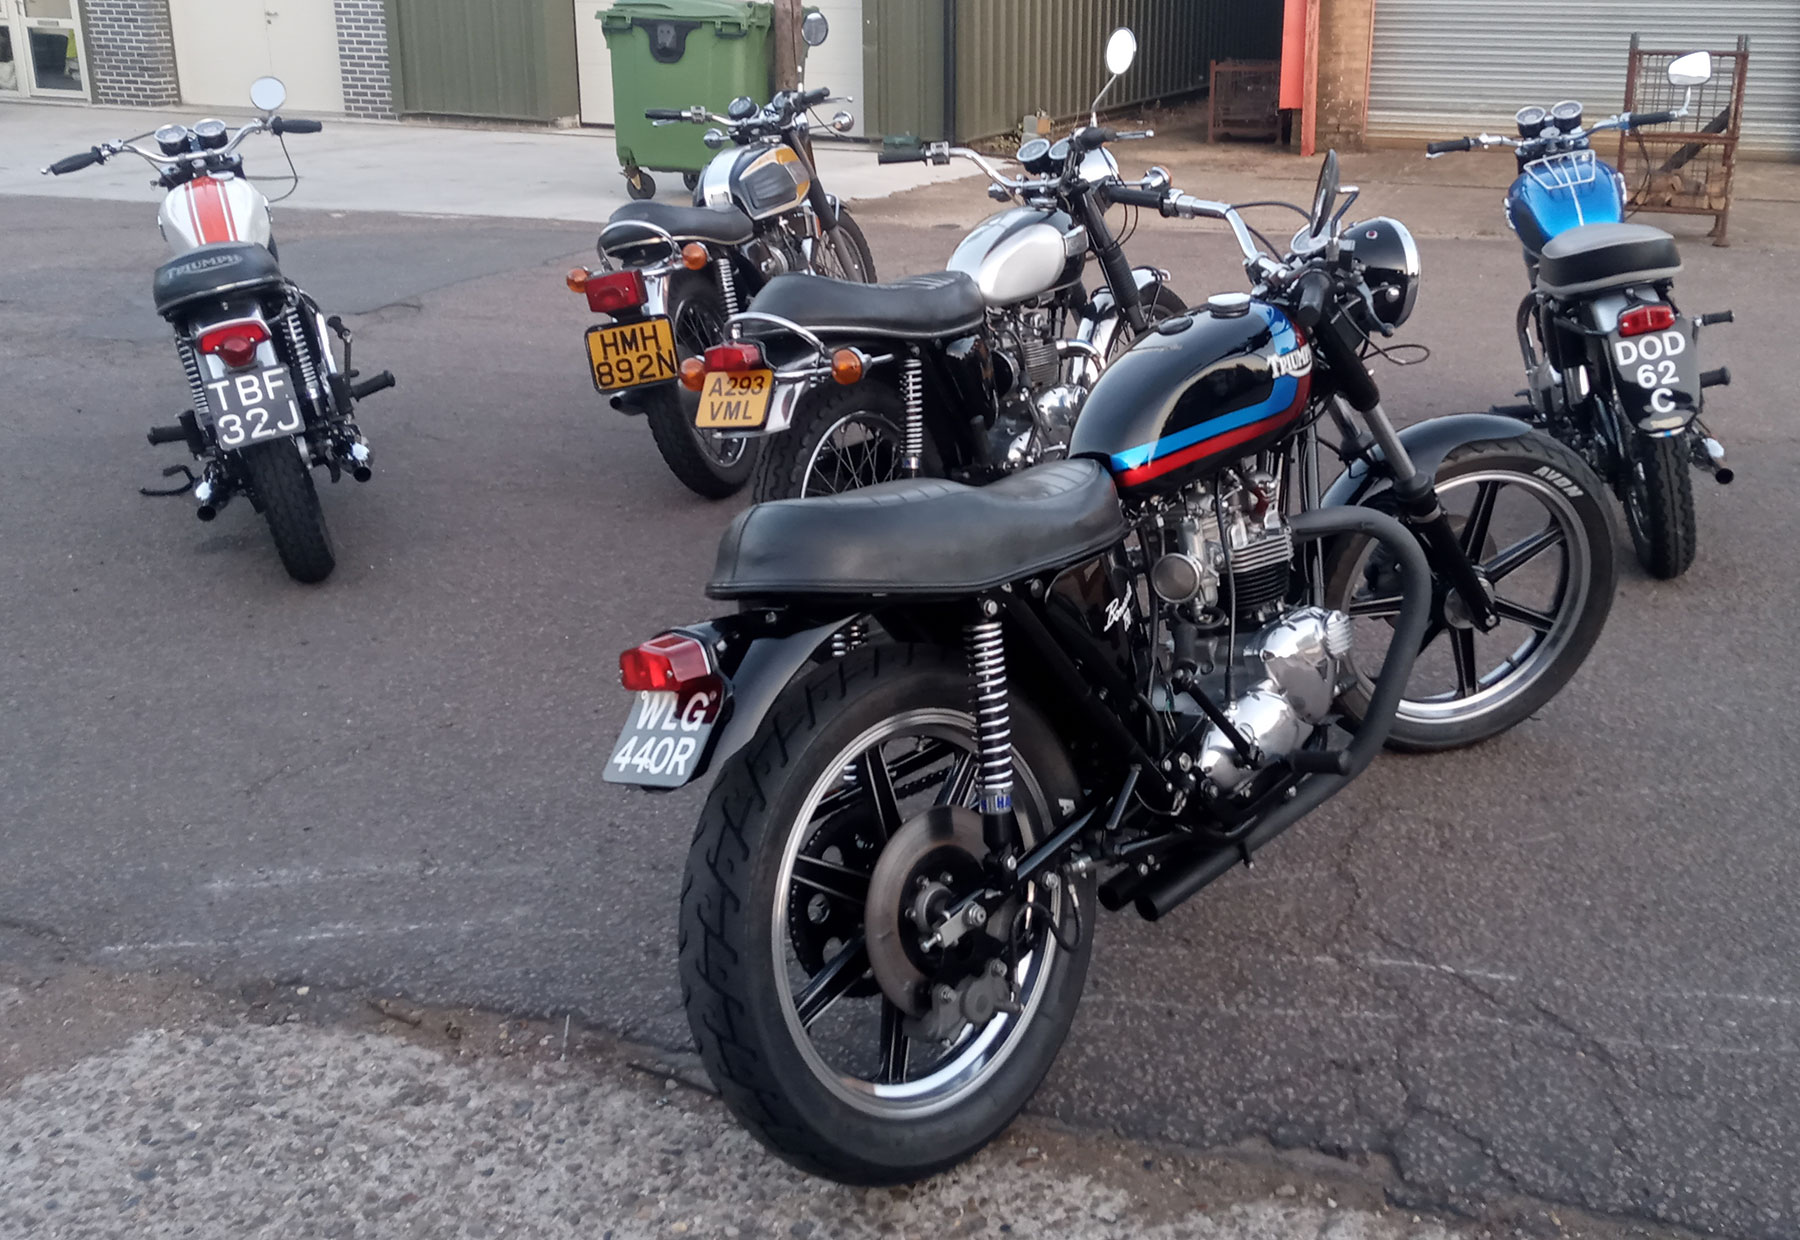 This 'gaggle' of Triumphs is proper eye candy!